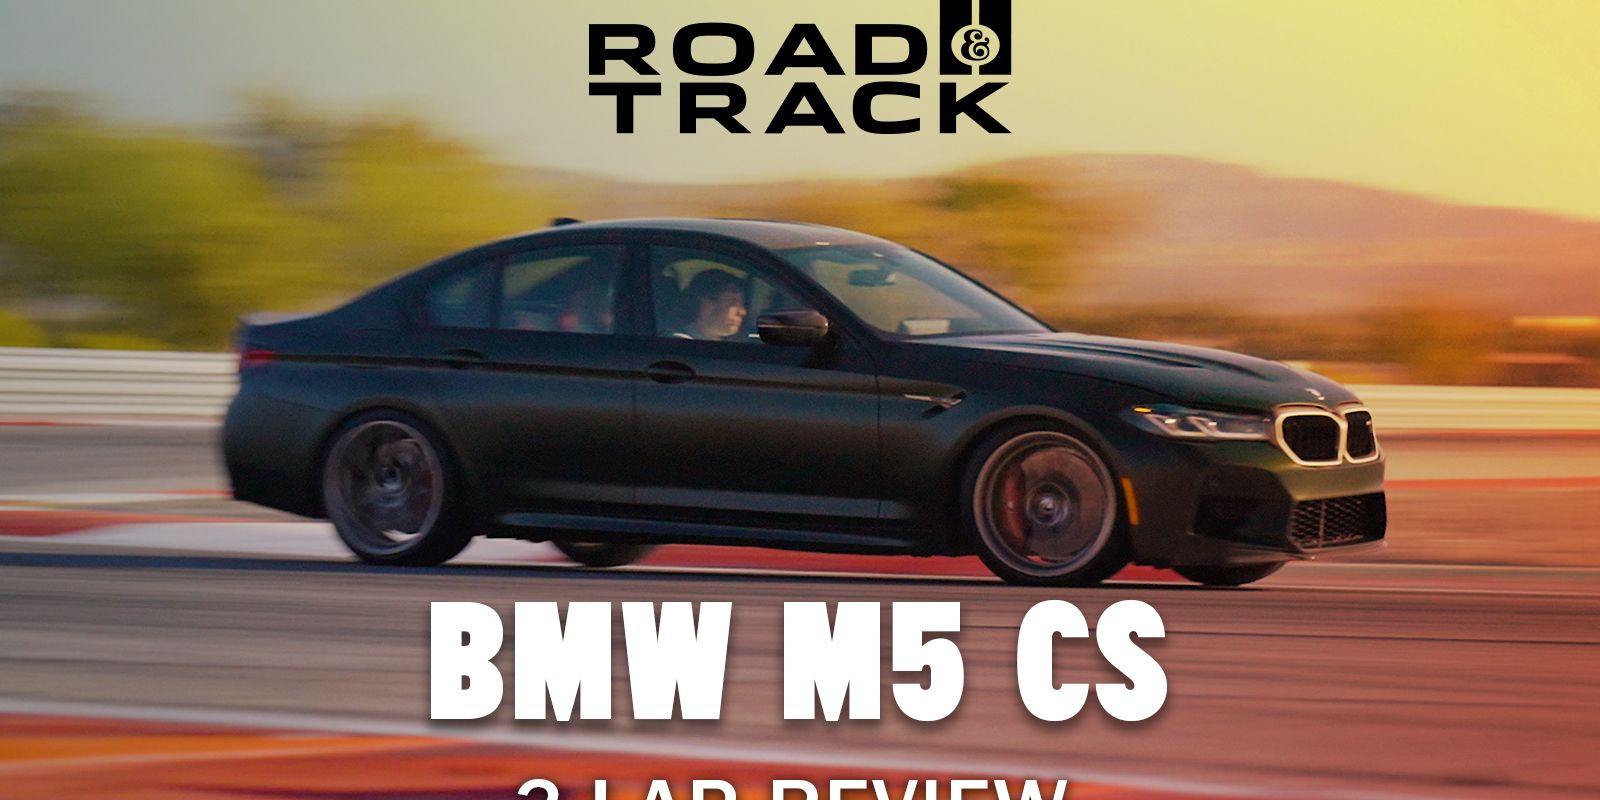 The New CS Proves How Good the BMW M5 Can Be